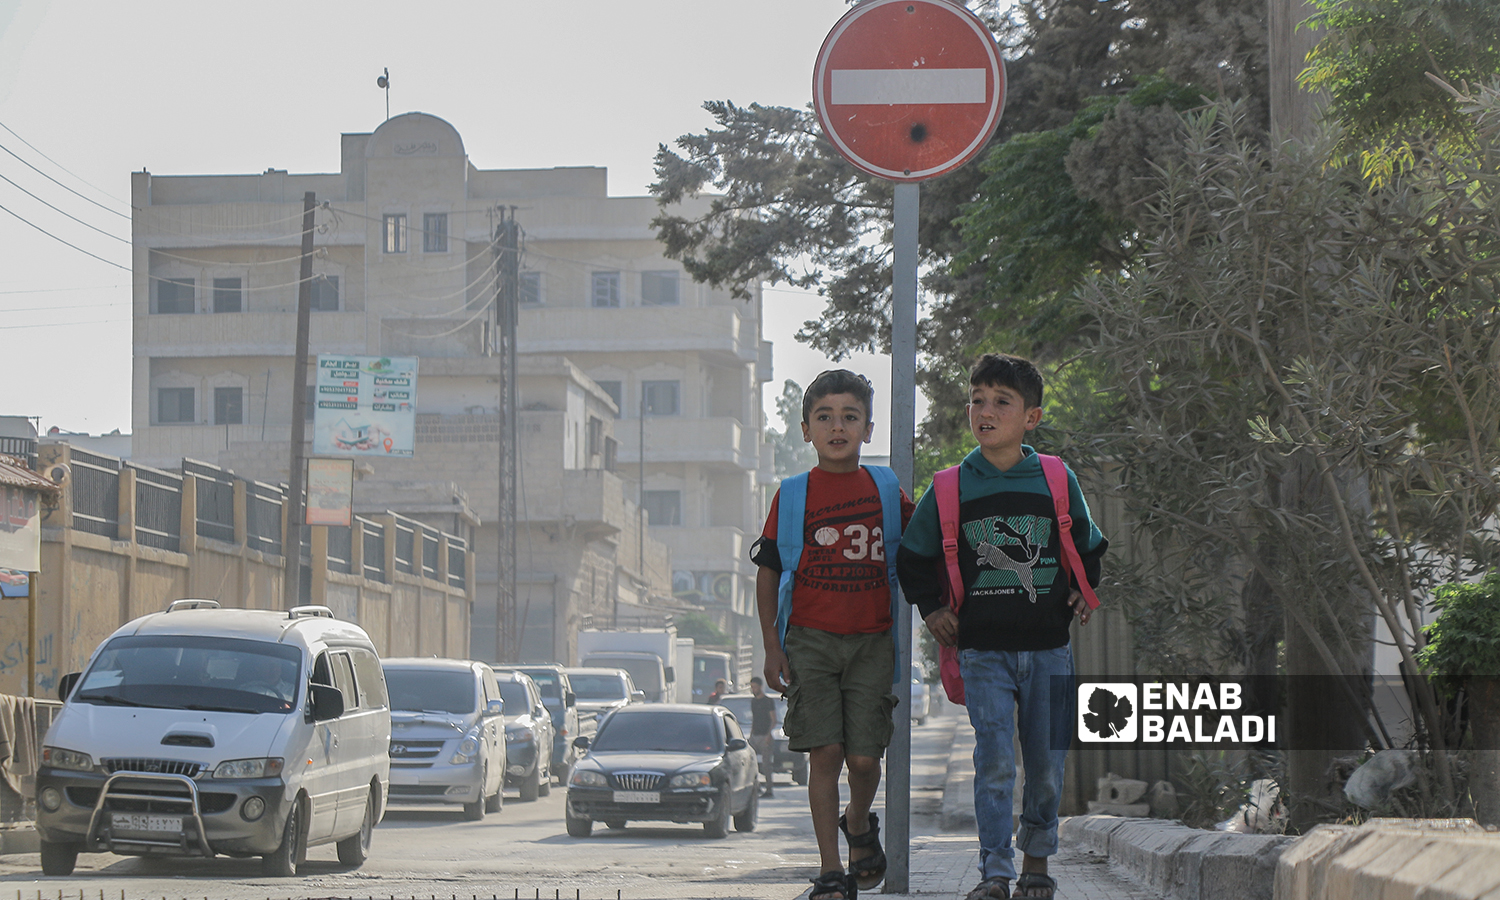 Two primary school students go to school in the morning at the beginning of the new school year in the northern countryside of Aleppo - Azaz city - 22 September 2021 (Enab Baladi / Walid Othman)
